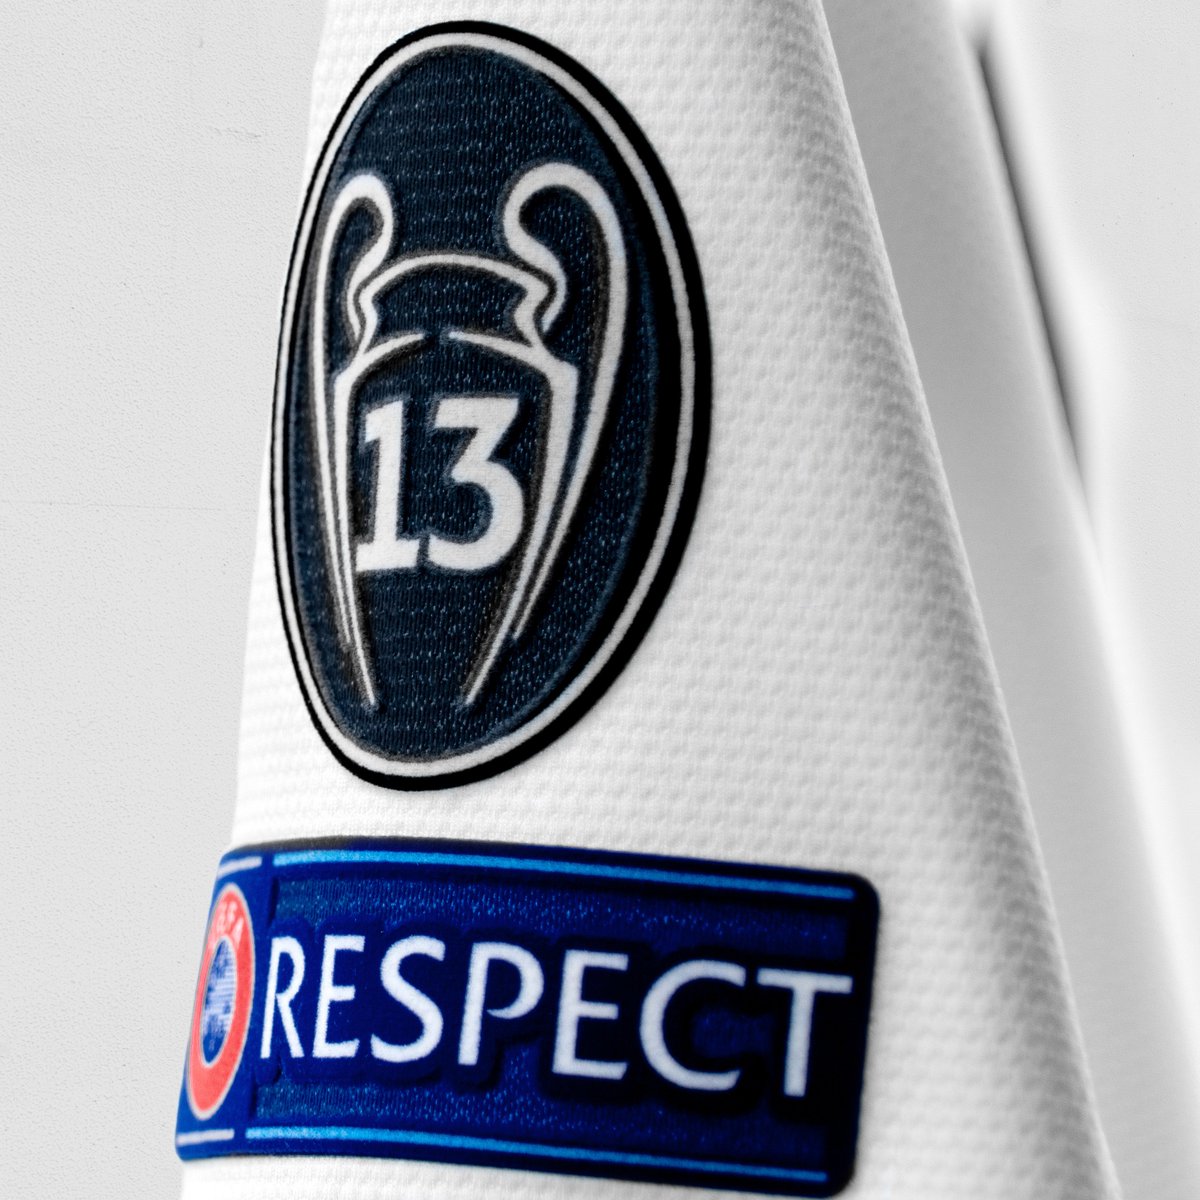 REAL MADRID, BARCELONA RESPECT STARBALL UEFA UCL BADGES PLAYER ISSUE KIT